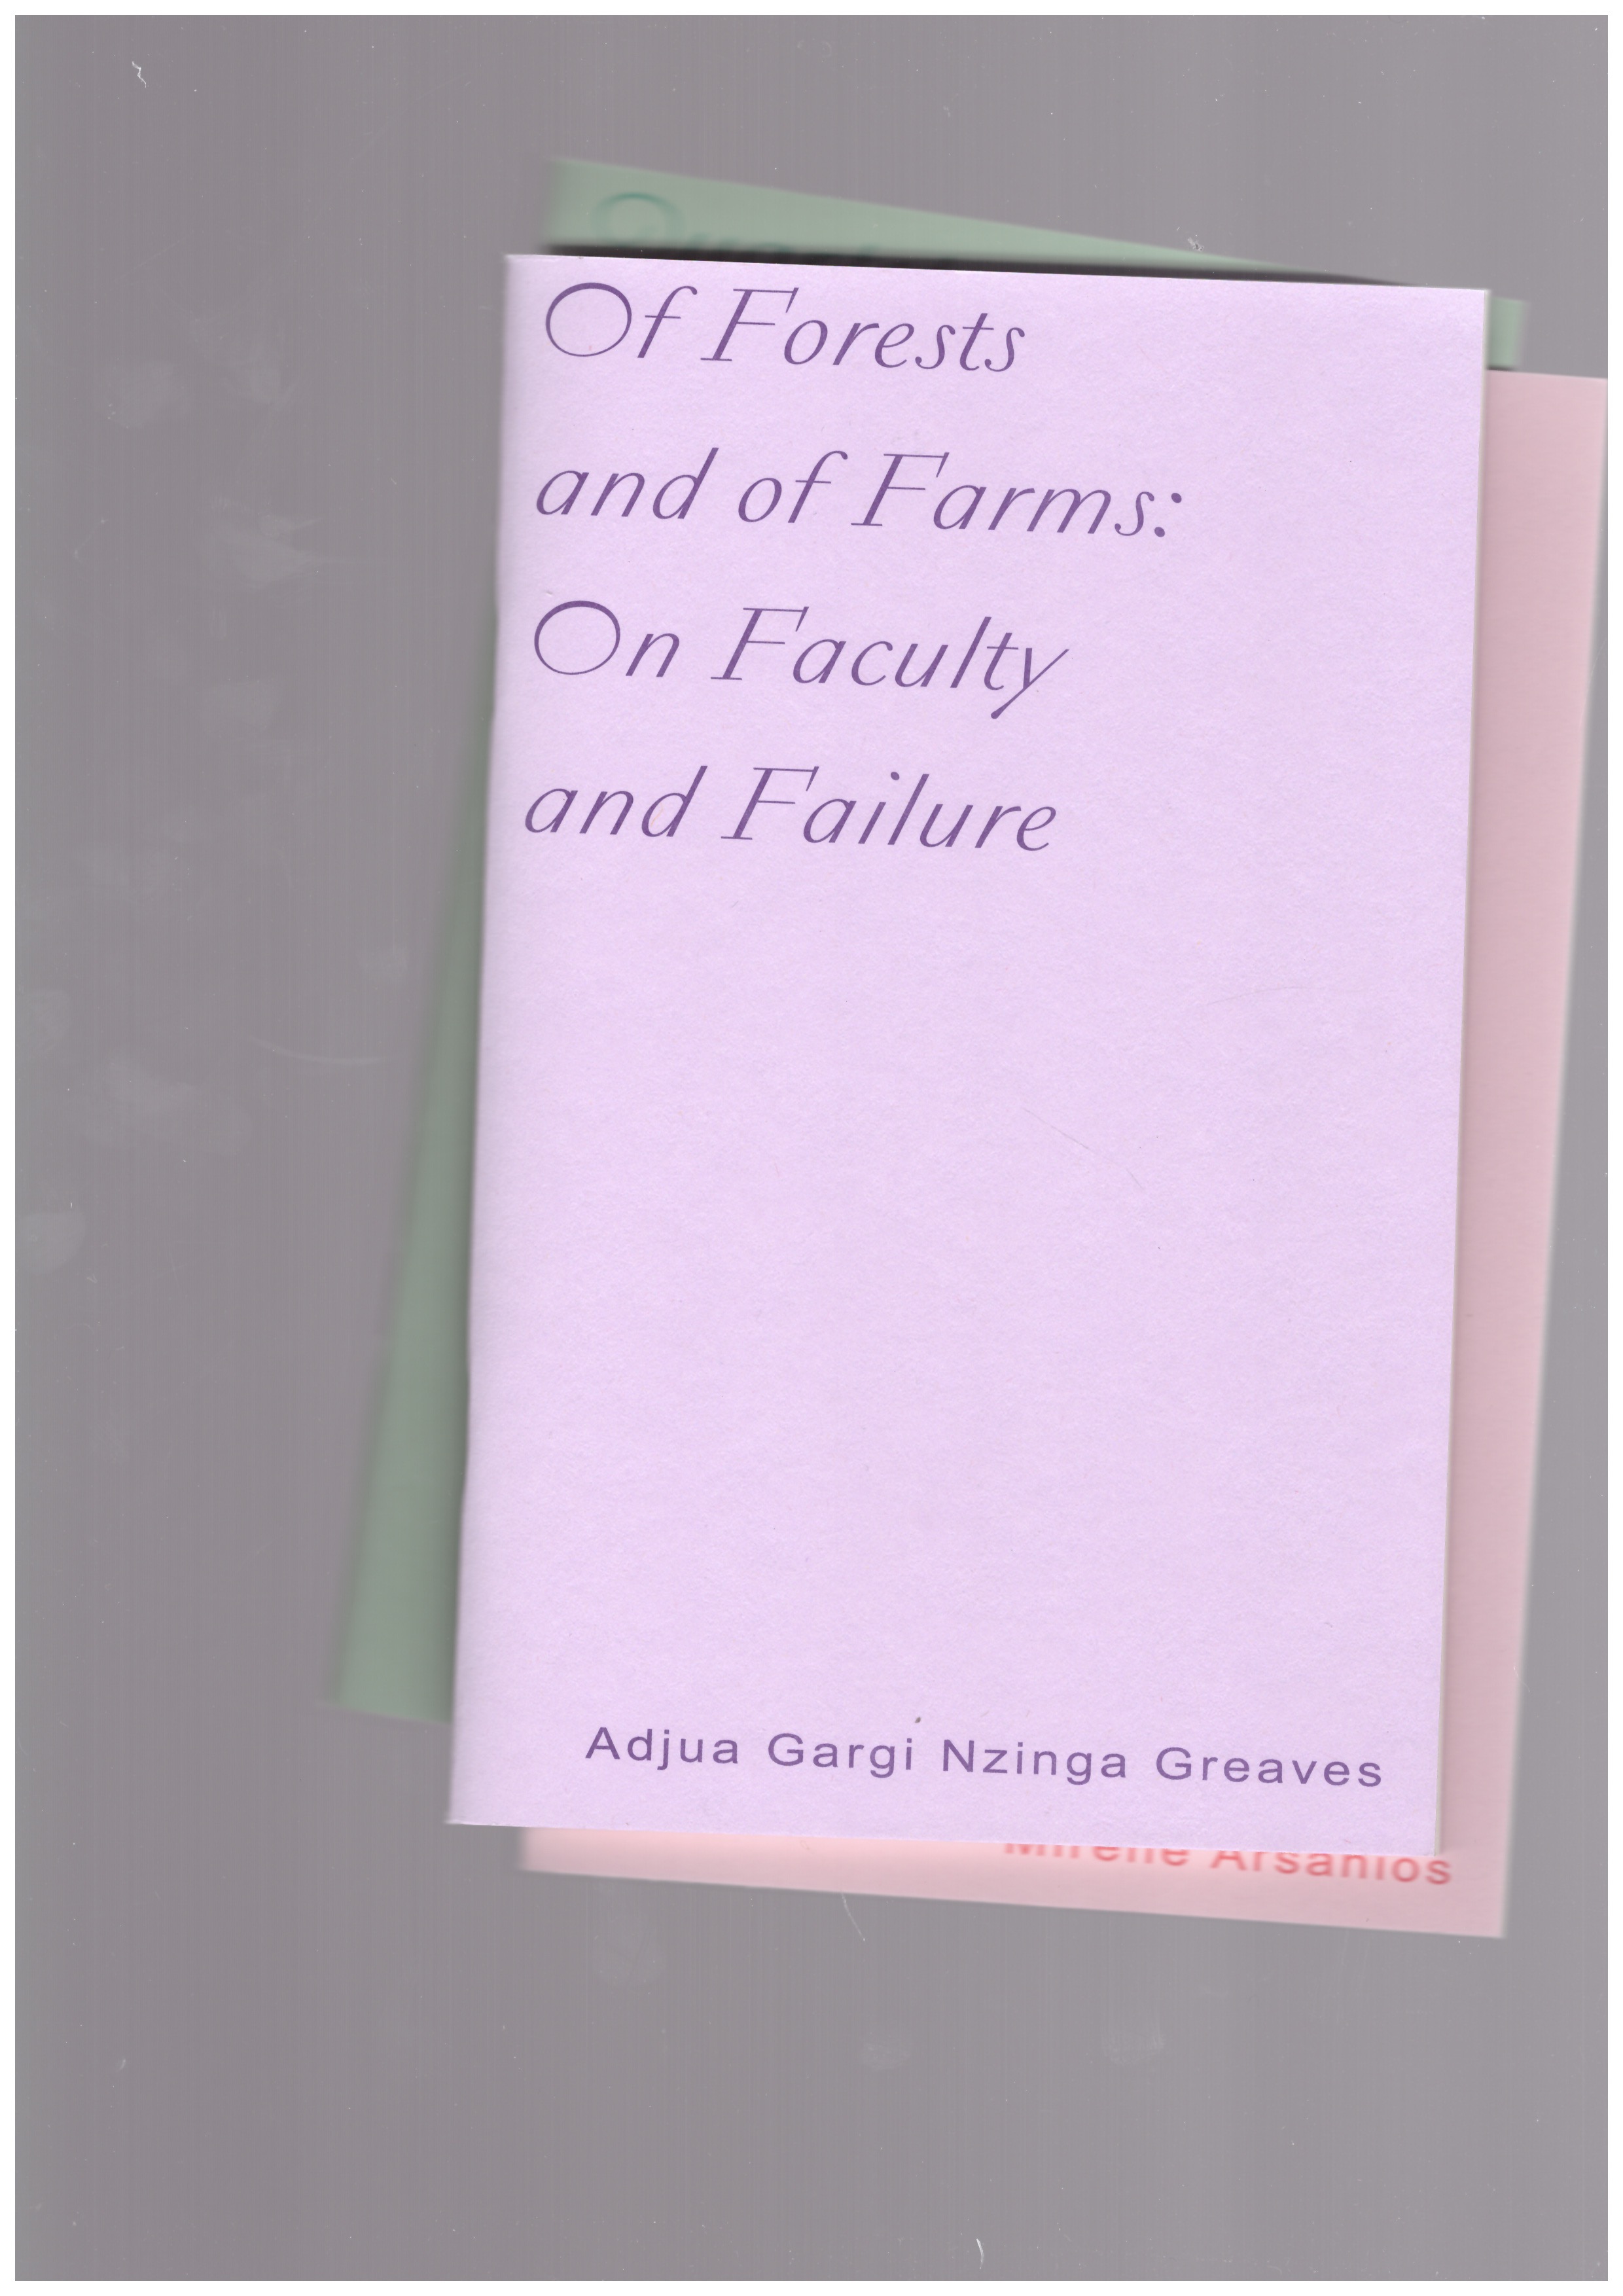 GREAVES, Adjua Gargi Nzinga - Of Forests and of Farms: On Factulty and Failure